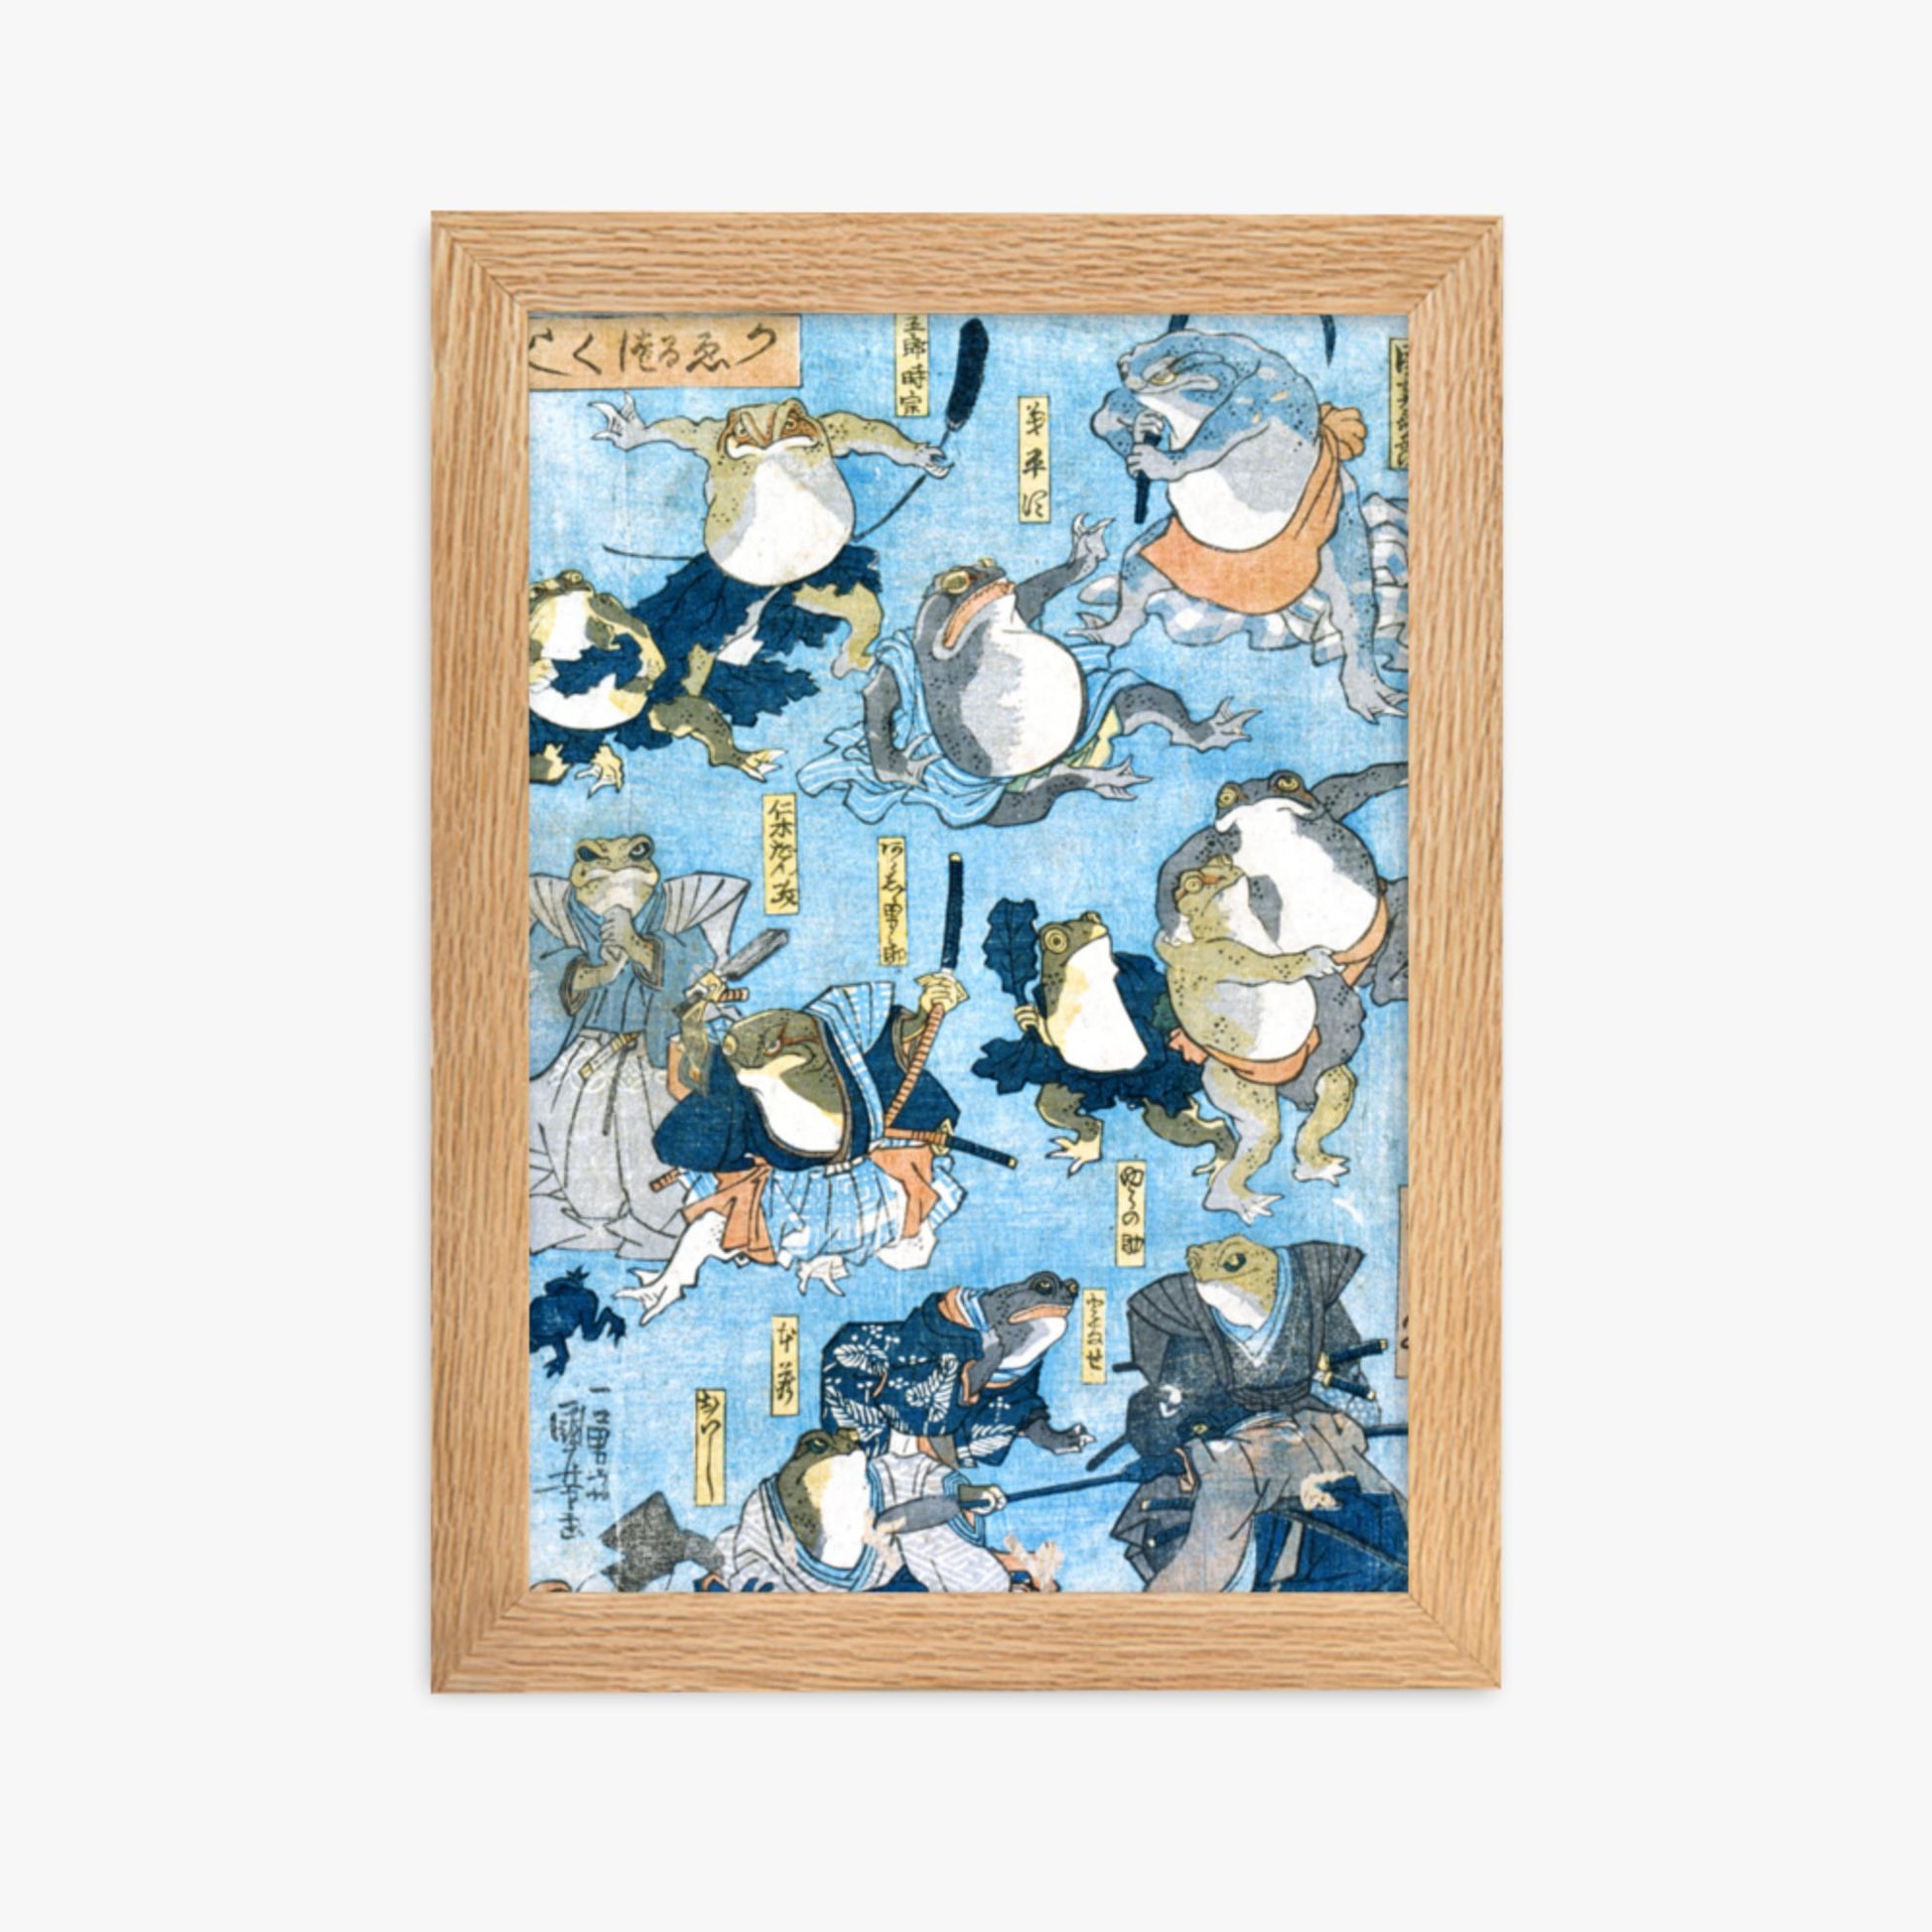 Utagawa Kuniyoshi - Famous Heroes of the Kabuki Stage Played by Frogs  21x30 cm Poster With Oak Frame